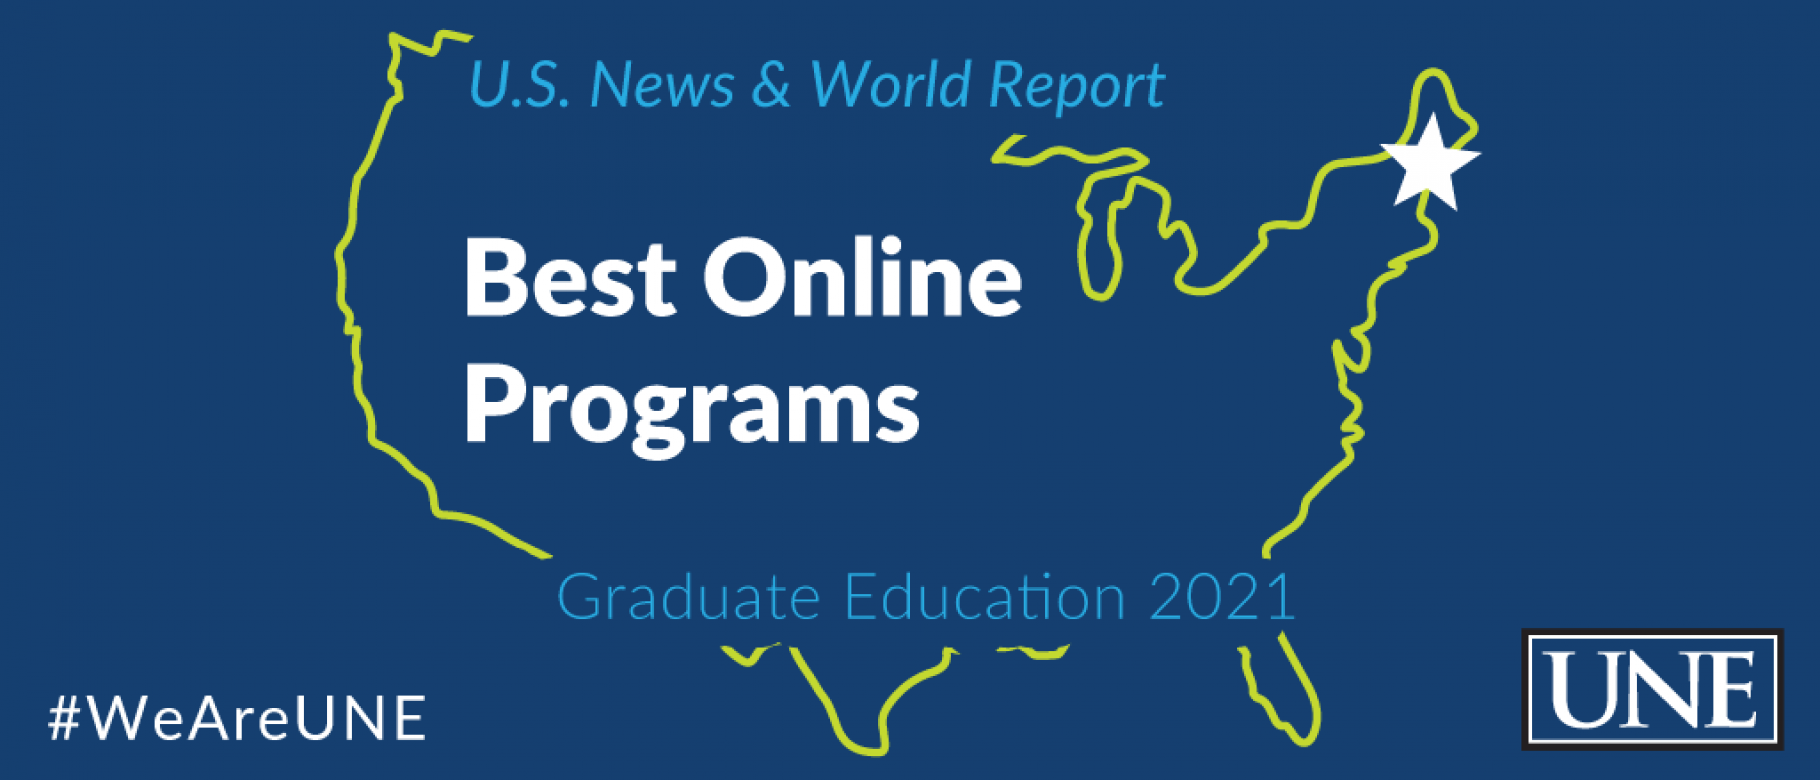 UNE's online graduate programs have ranked in the top 70 nationwide by U.S. News and World Report